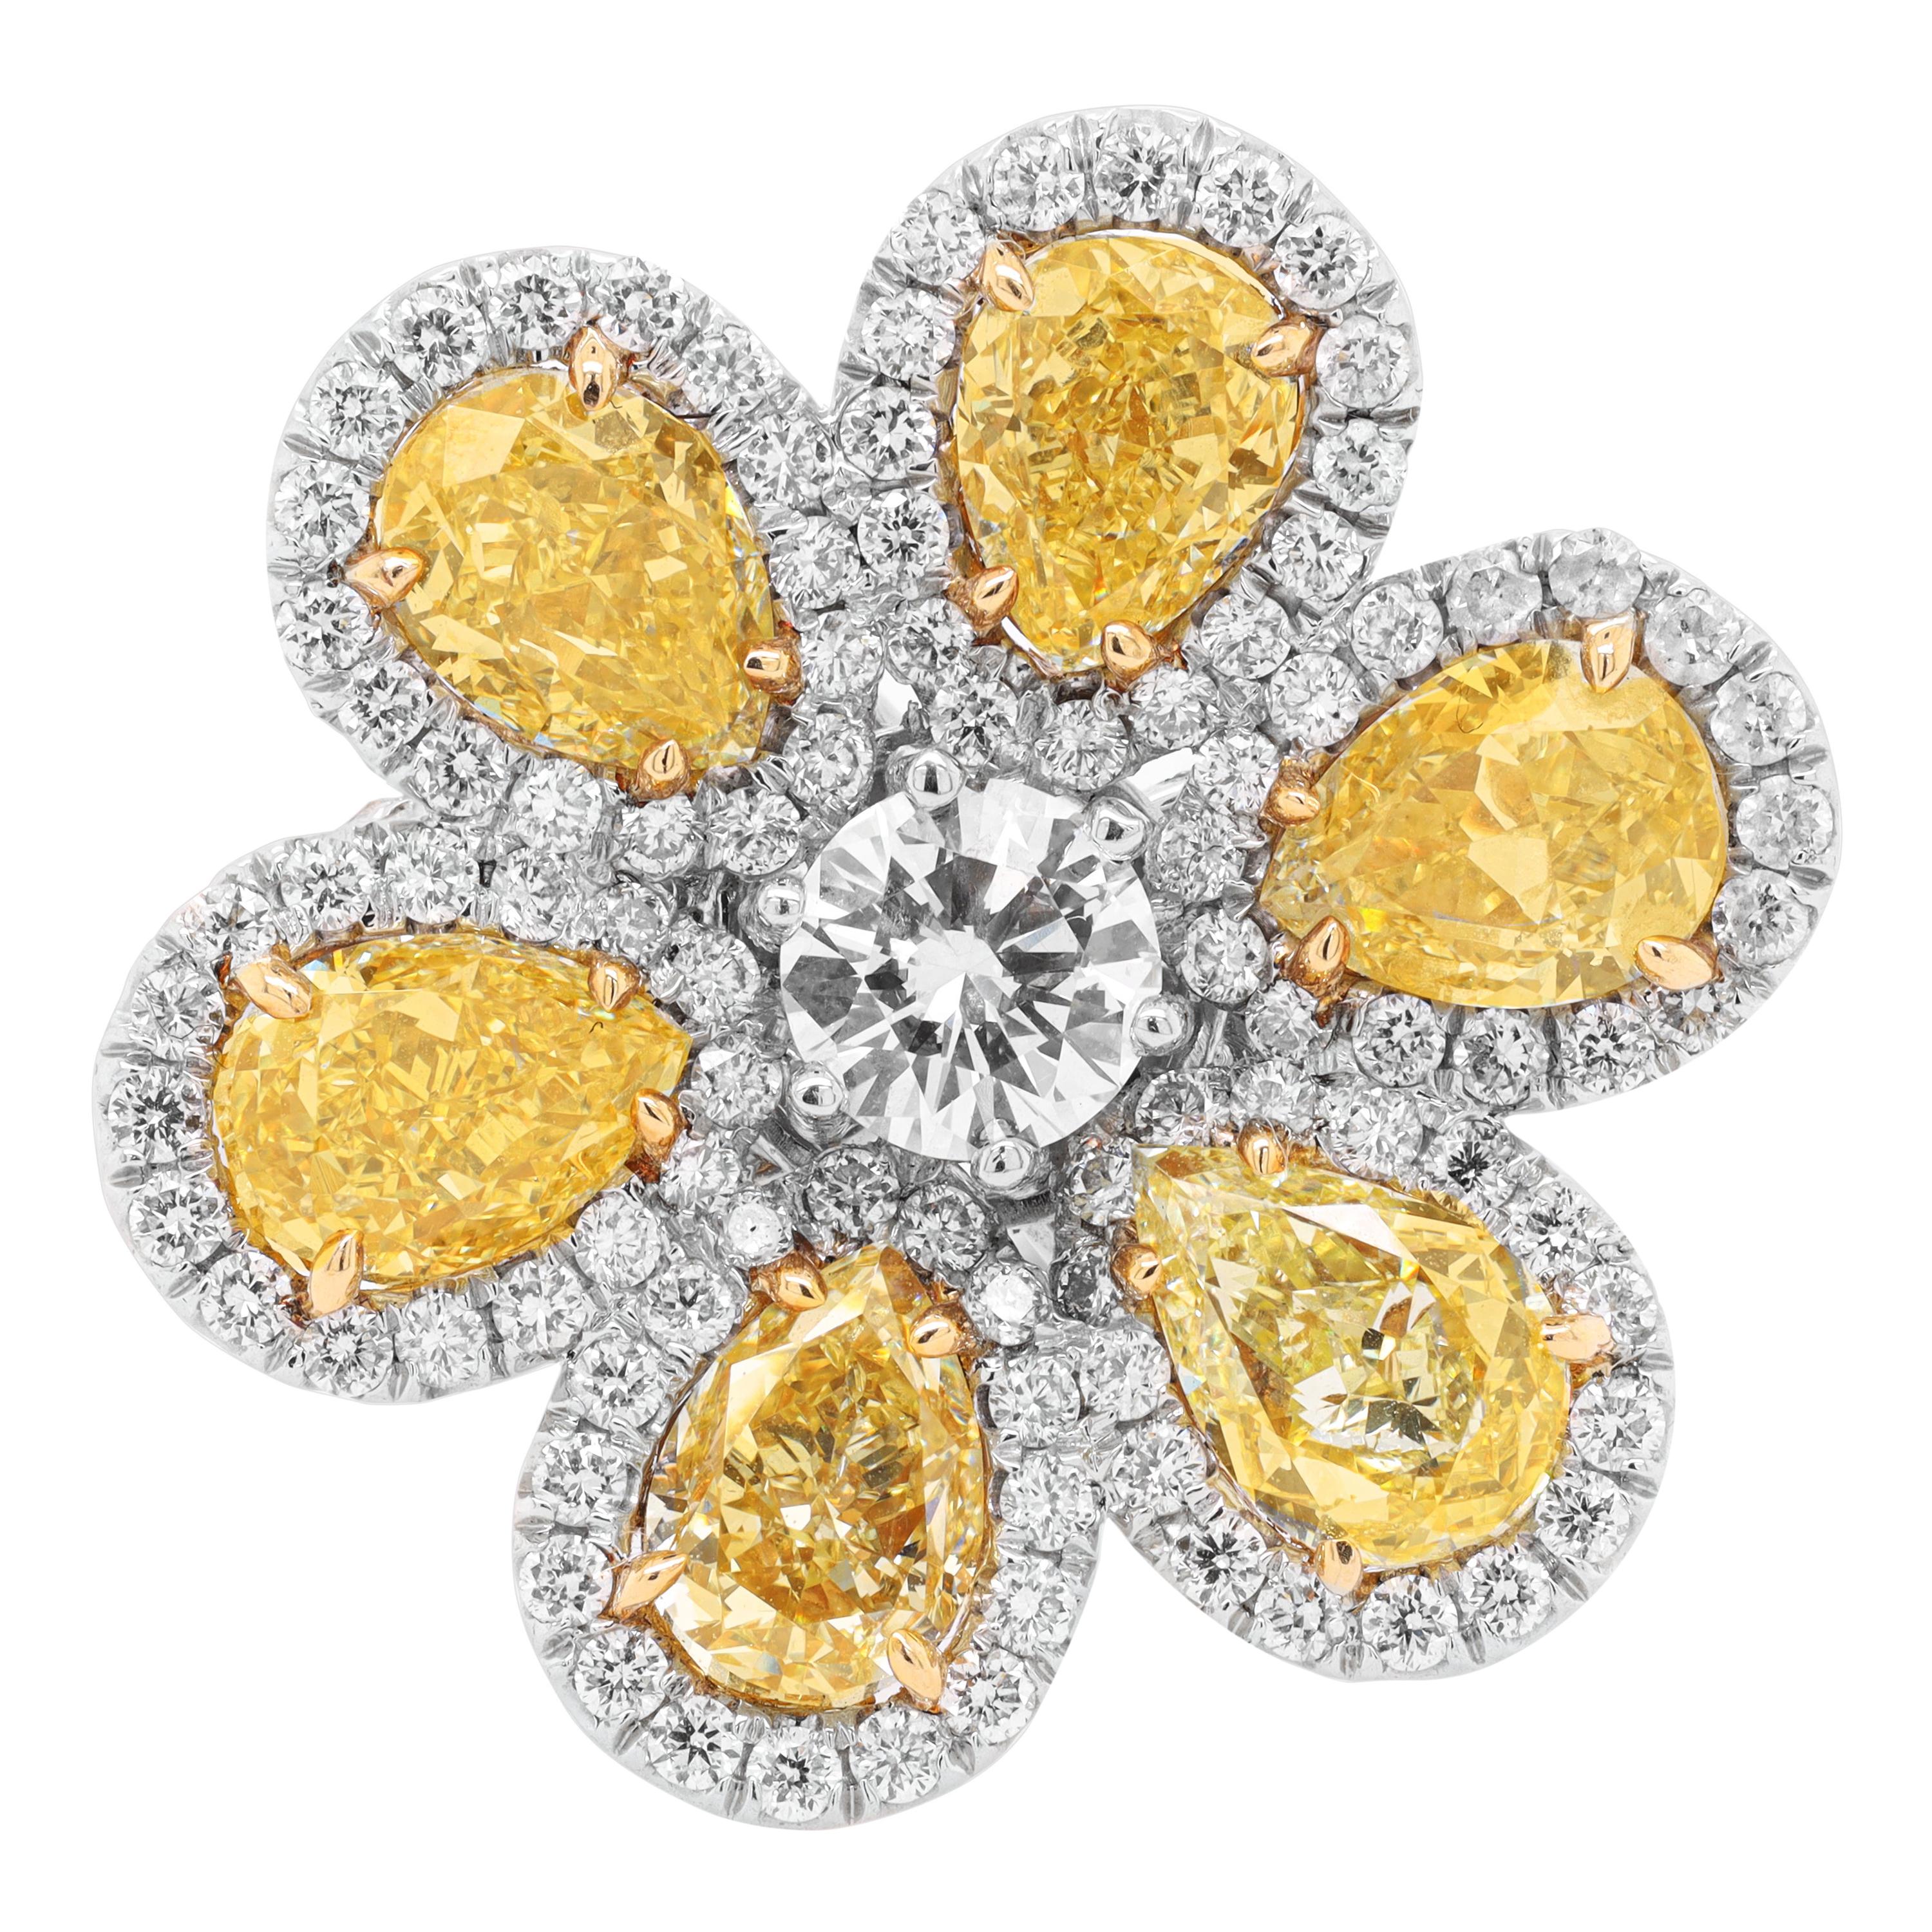 Fancy yellow flower diamond ring with five gia certified fancy yellow pear shape diamonds and and one gia certified white round diamond in the middle with micropave round diamonds around in plat and 18kt yellow gold.
